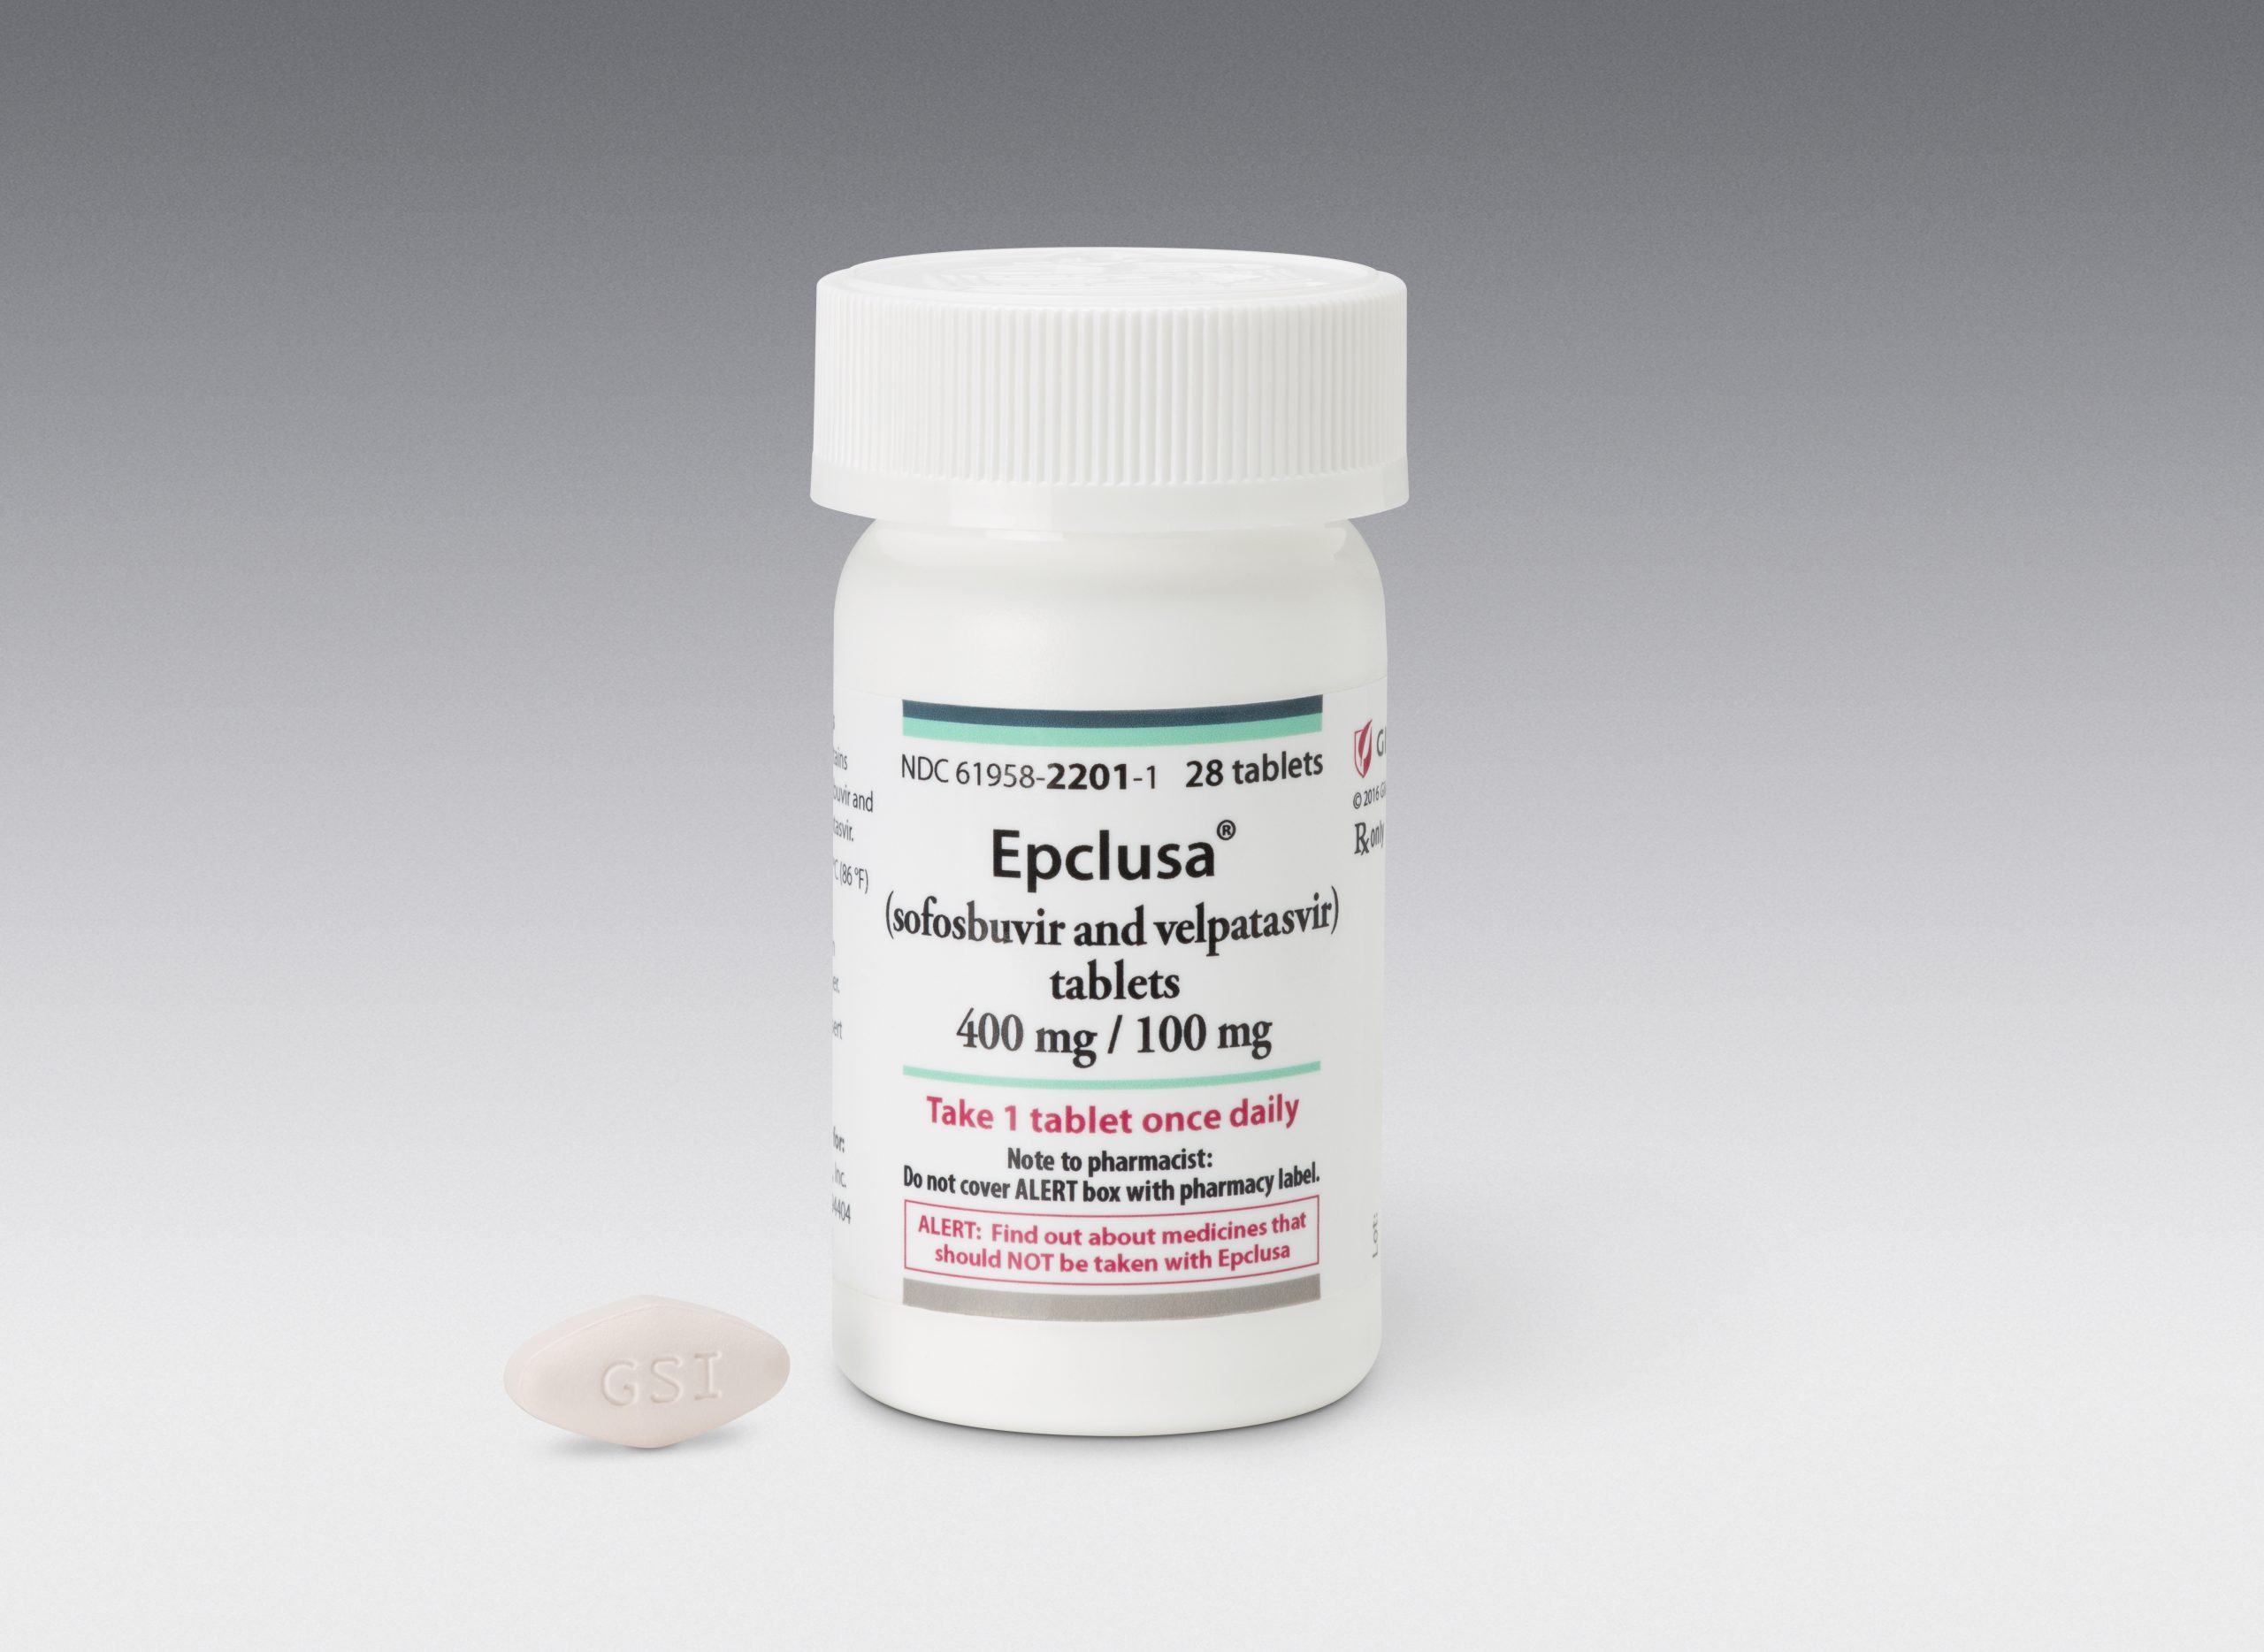 Epclusa is a pan-genotypic therapy, but won't counteract the trend